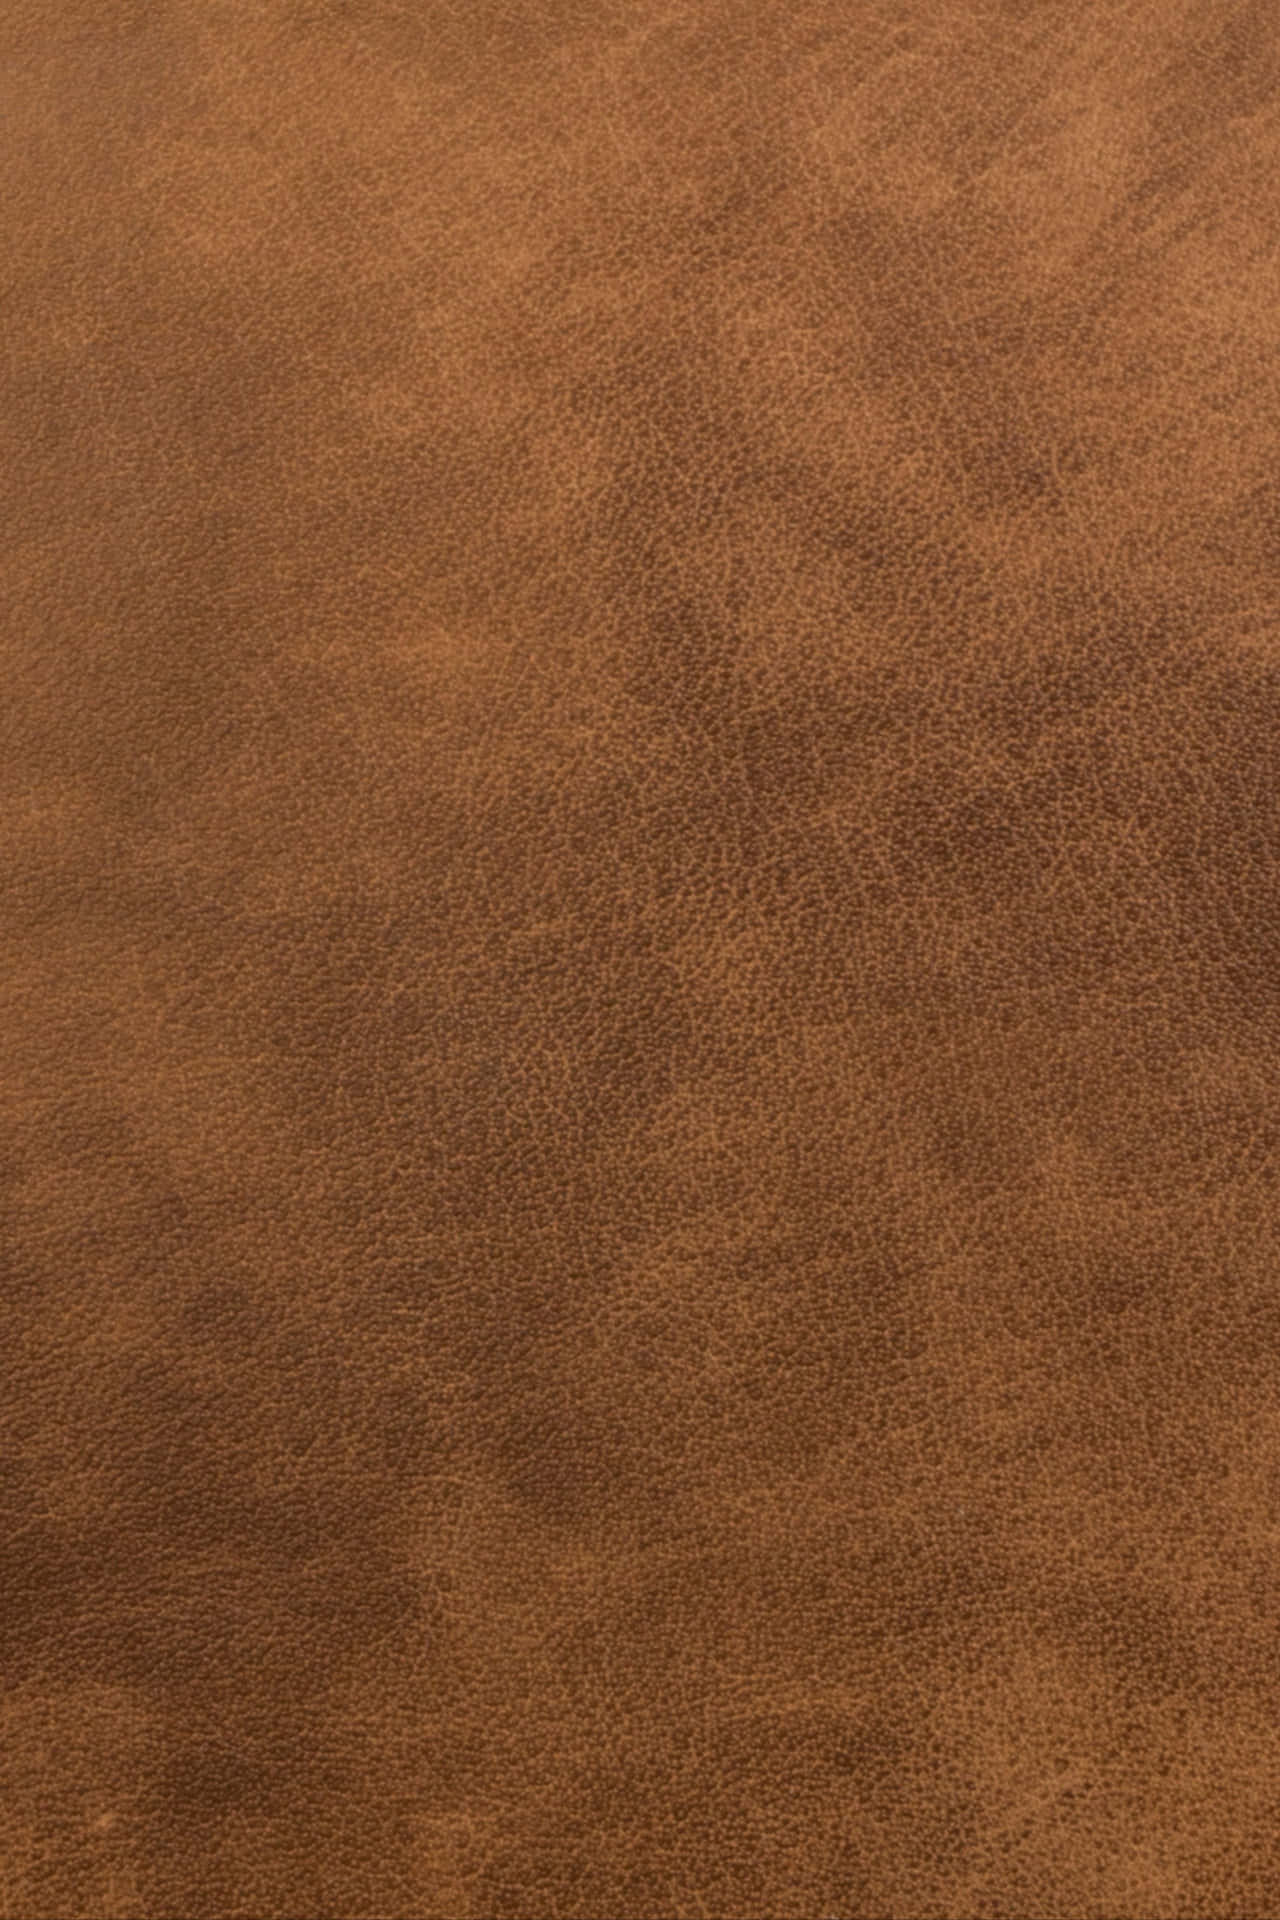 Rustic Brown Leather Texture Picture